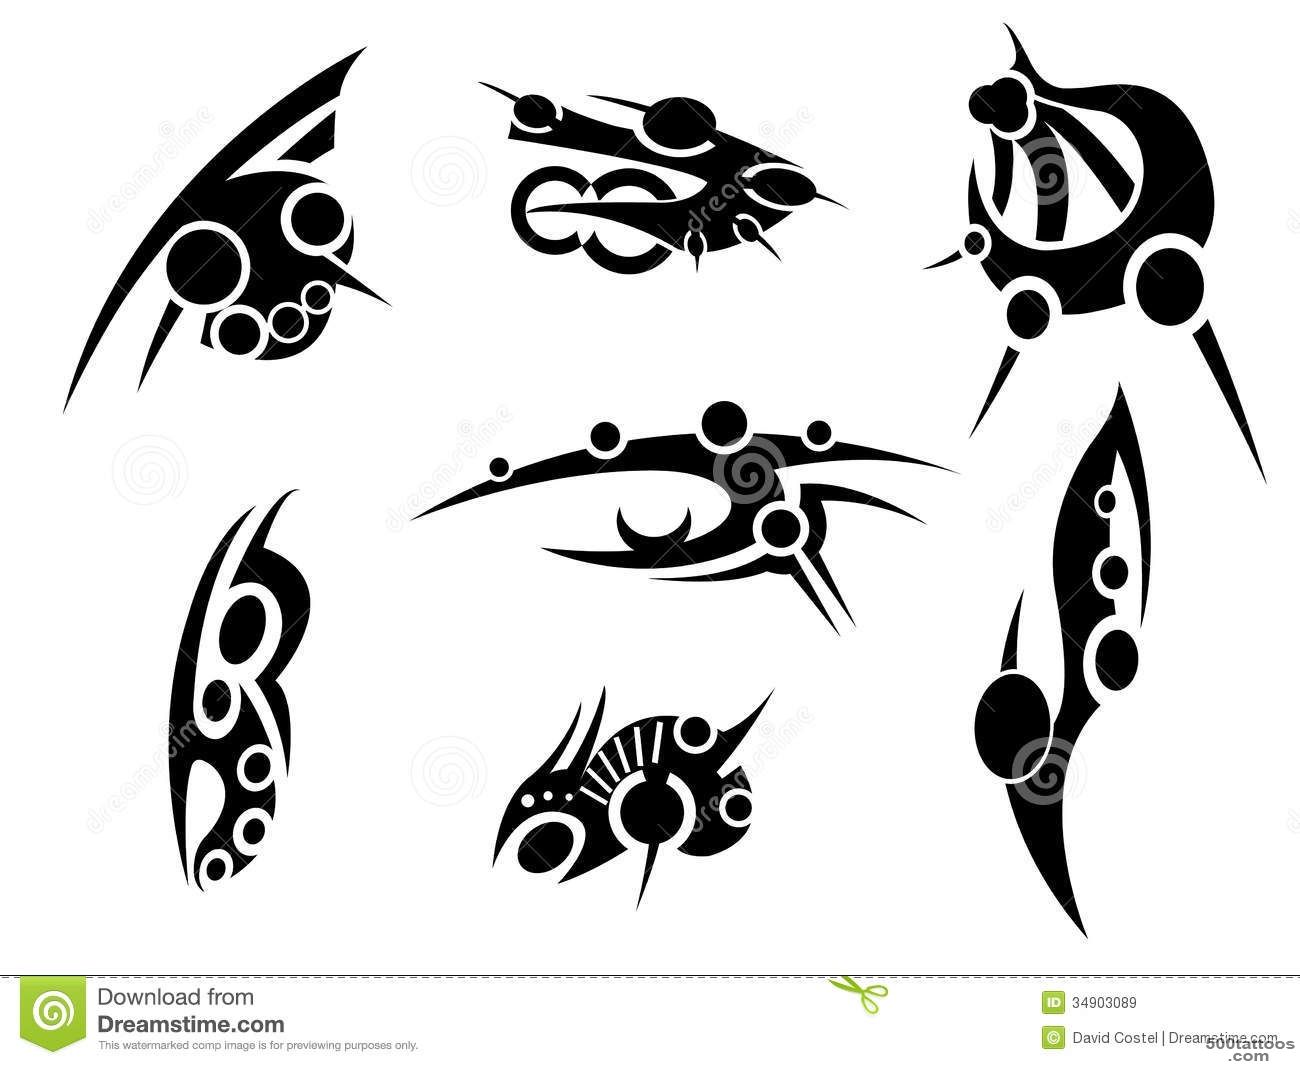 Tribal Bionic Tattoo Pack Royalty Free Stock Images   Image 34903089_20